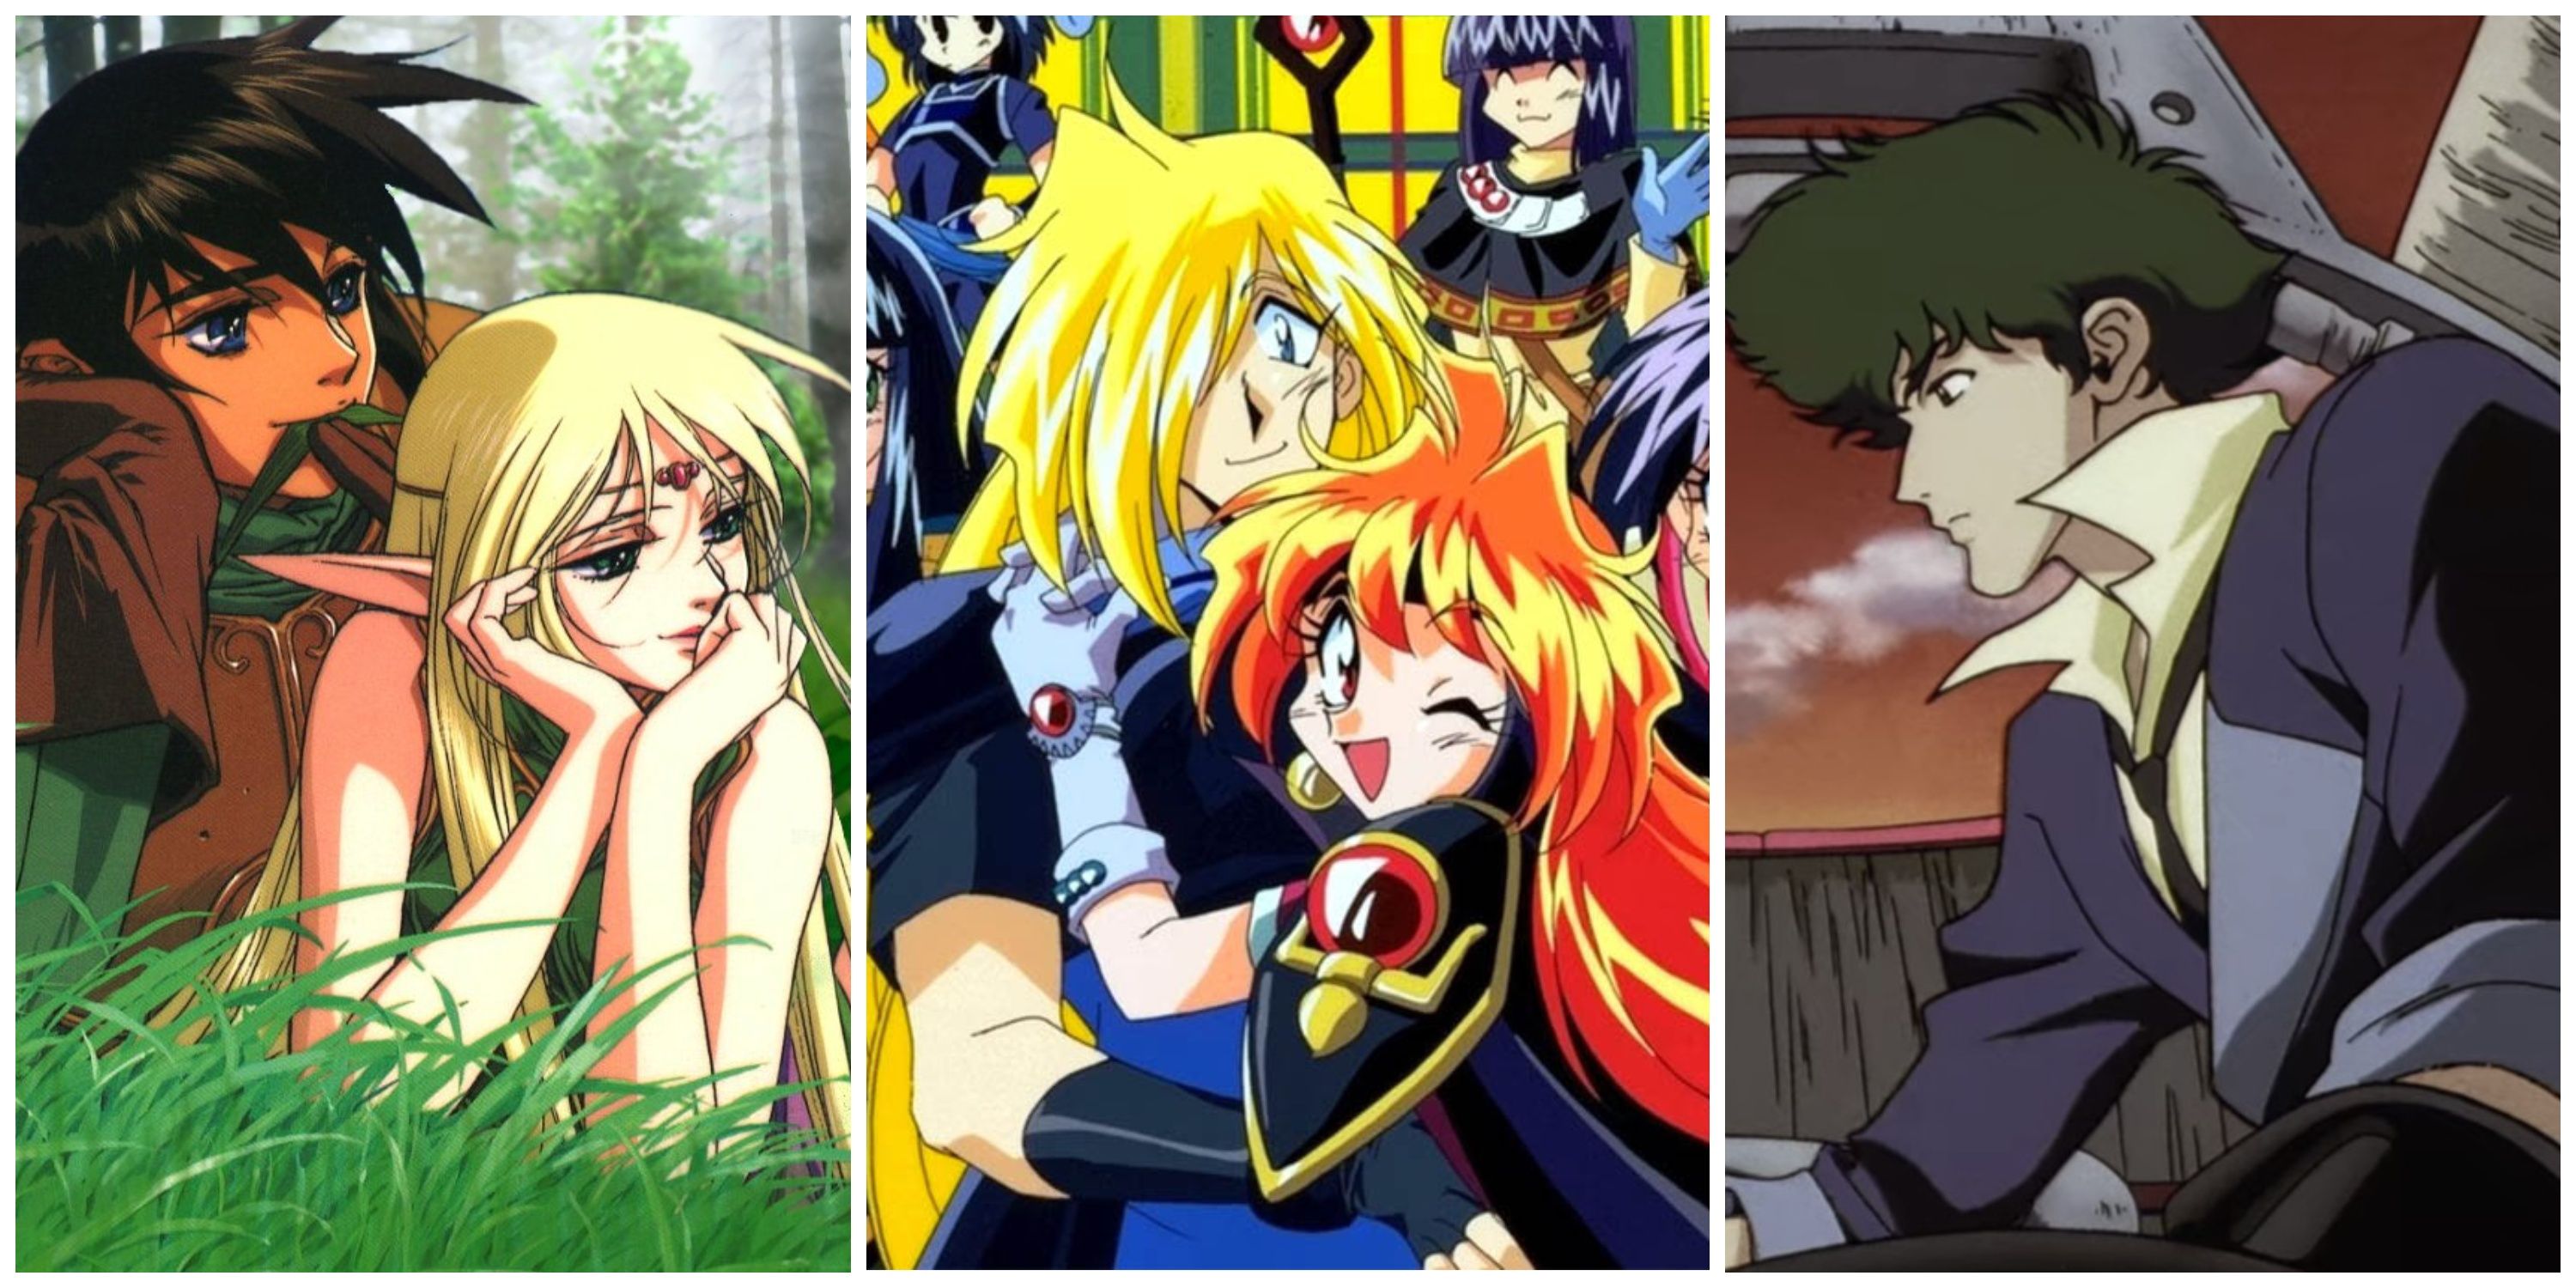 Split image, Deedlit and Parn from The Record of Lodoss War, Lina Inverse and Gourry from Slayers, and Spike from Cowboy Bebop